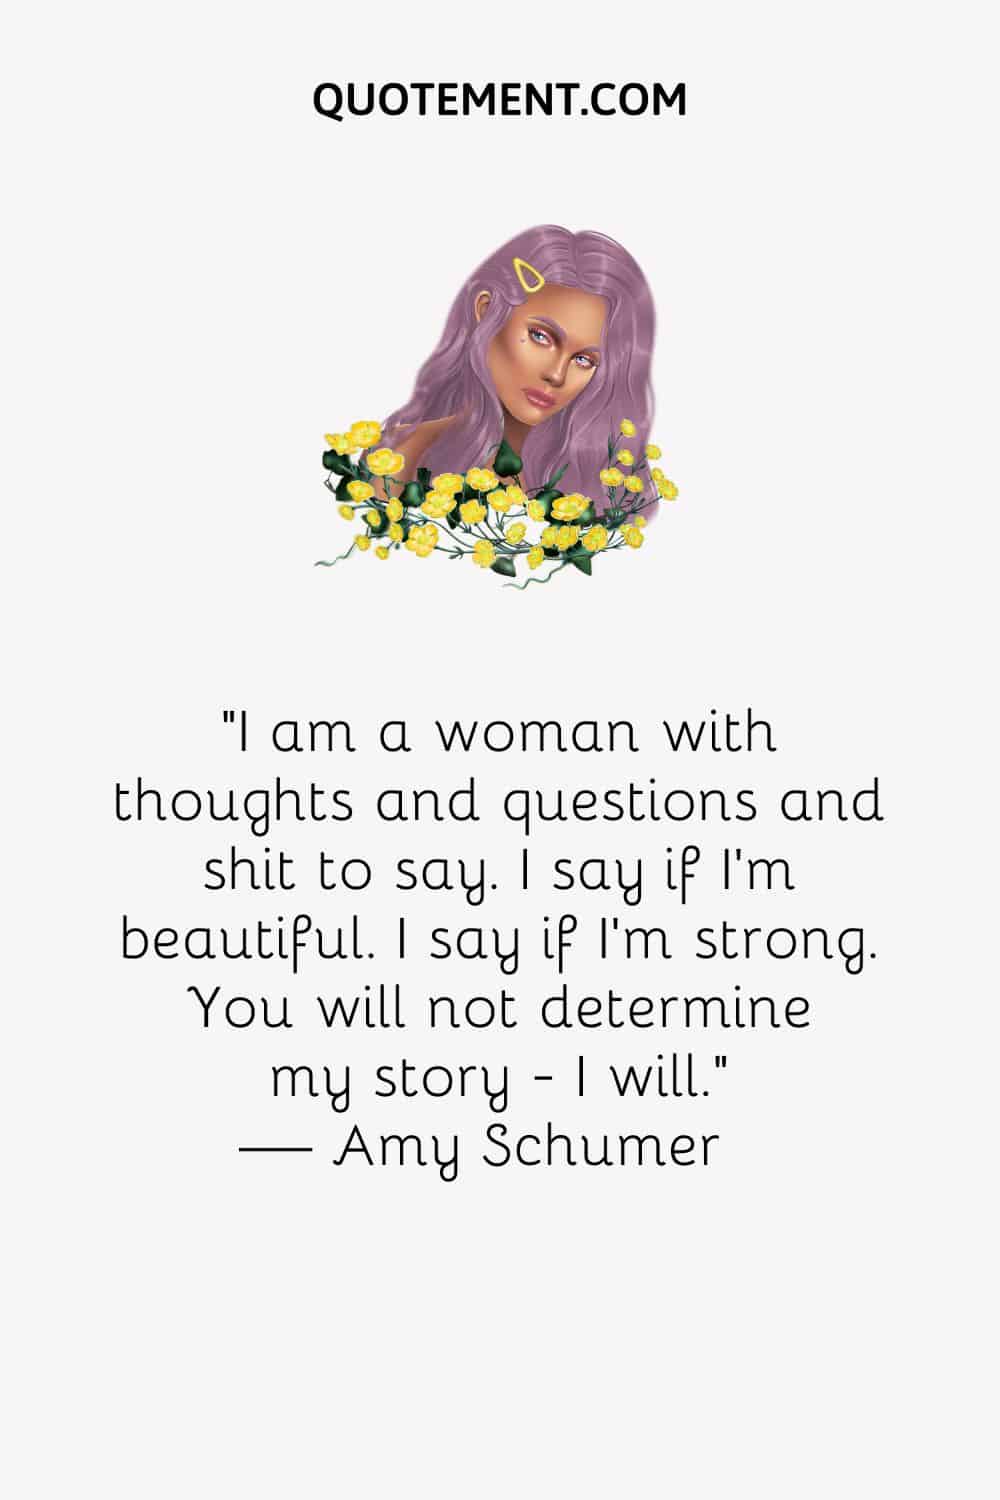 I am a woman with thoughts and questions and shit to say. I say if I'm beautiful. I say if I'm strong. You will not determine my story